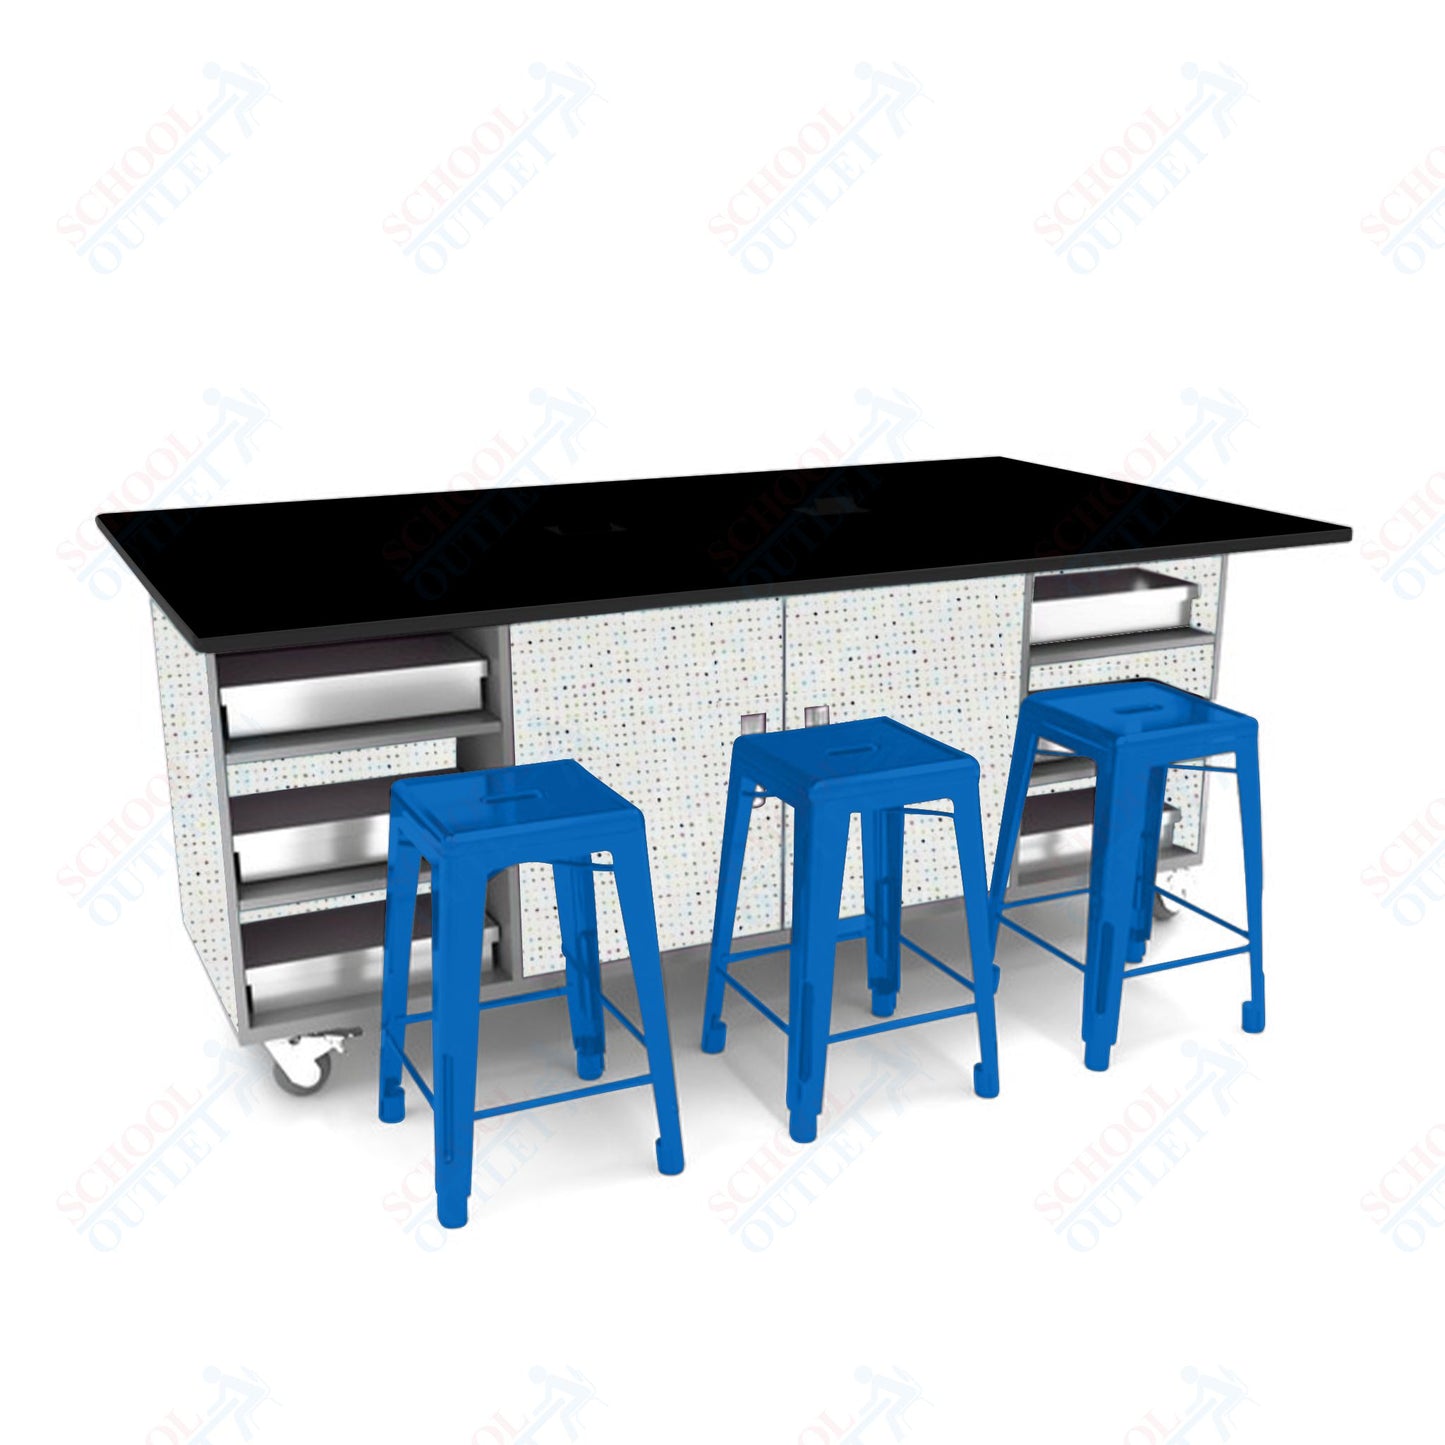 CEF ED Double Table 36"H Tough Top, Laminate Base with  6 Stools, Storage bins, and Electrical Outlets Included.